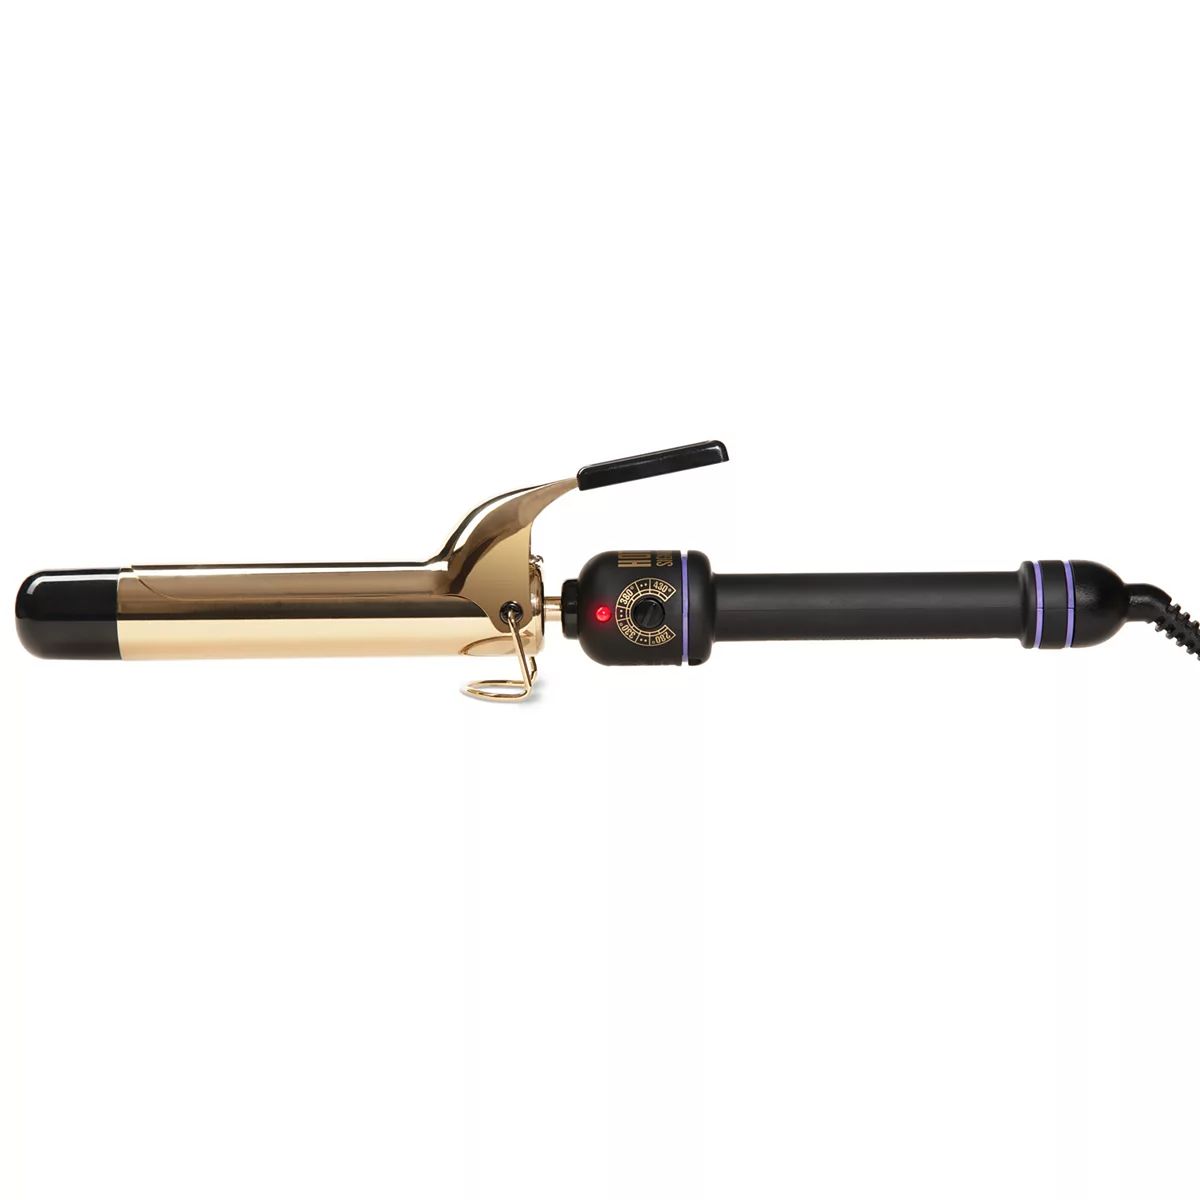 Hot Tools Signature Series 1 1/4-in. Curling Iron | Kohl's